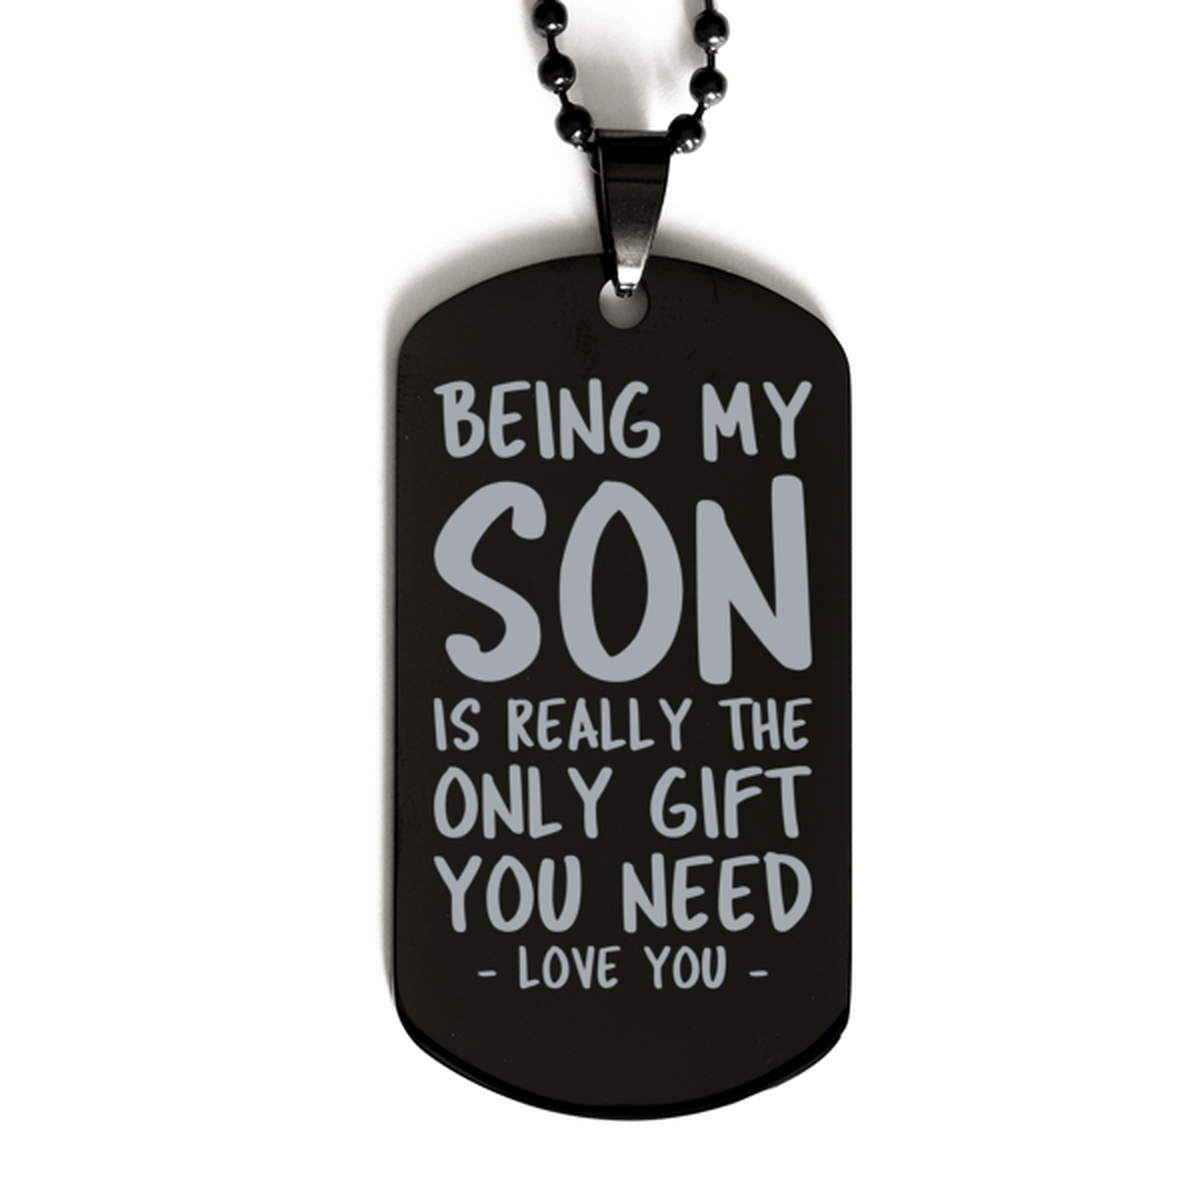 Funny Son Black Dog Tag Necklace, Being My Son Is Really the Only Gift You Need, Best Birthday Gifts for Son